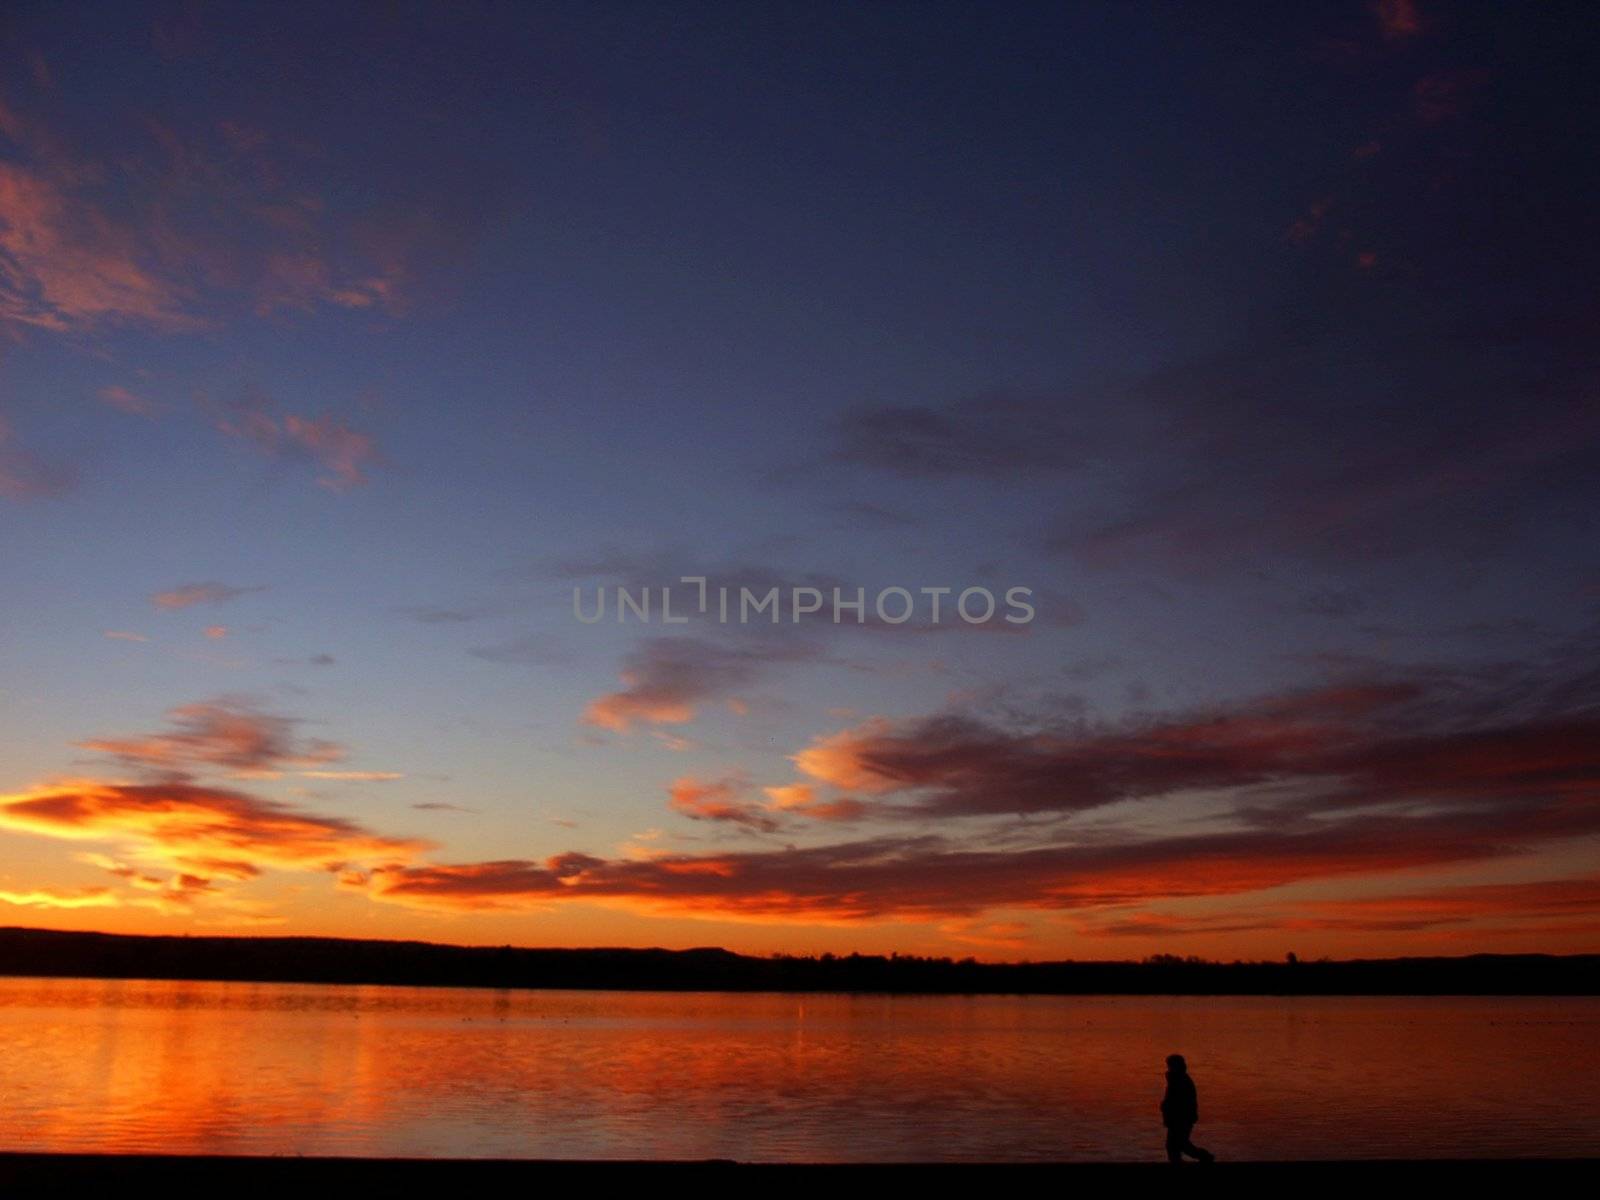 Sunrise on a lake with a person walking by jdebordphoto